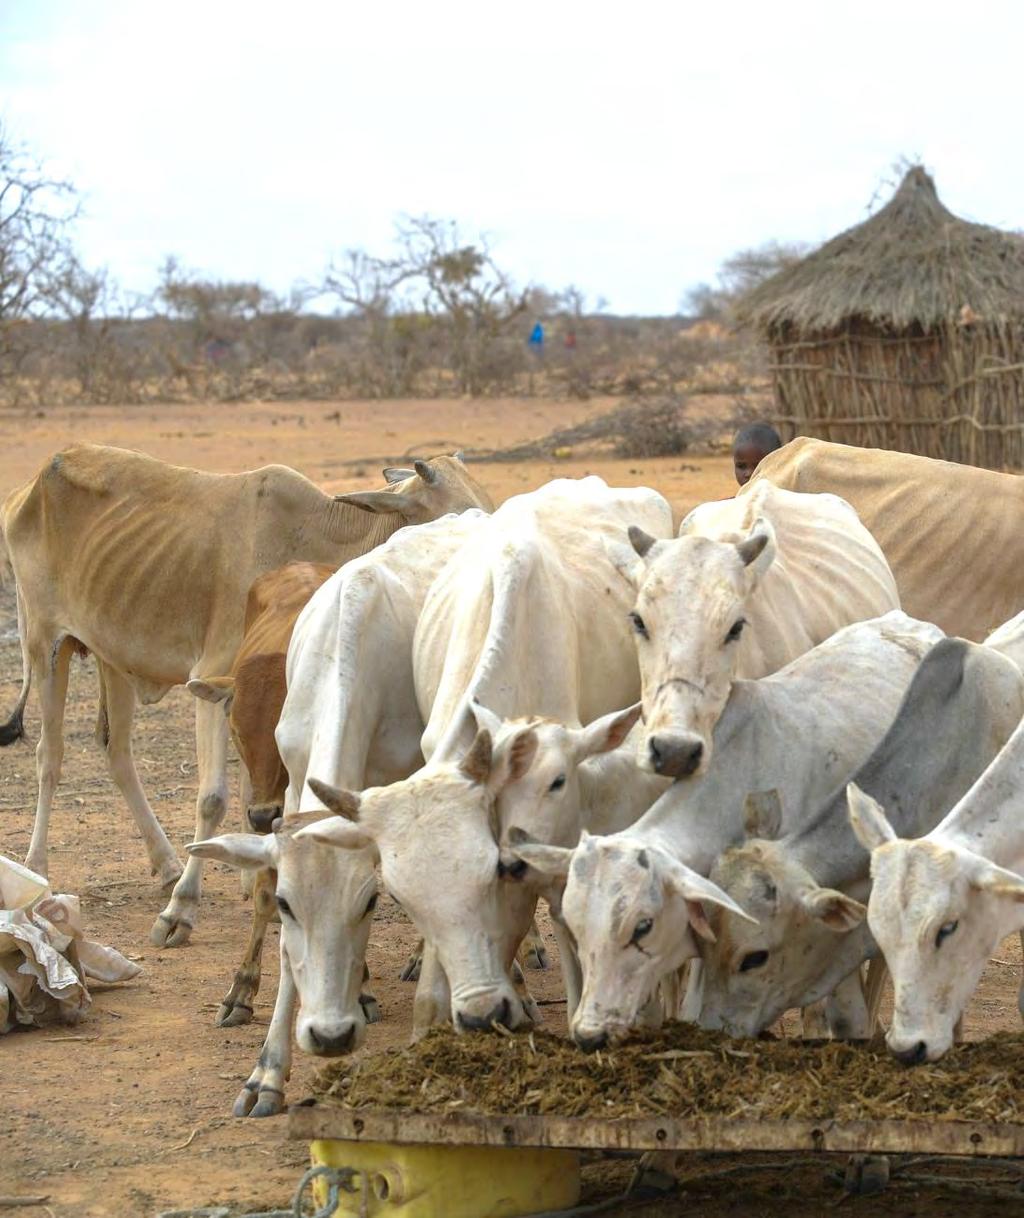 Main challenges in livestock production Pests and diseases 36% Lack of veterinary services 27% Insecurity -Conflict Cattle raiding 9% 9% Lack of grazing pastures Lack of water Others No Challenge 5%